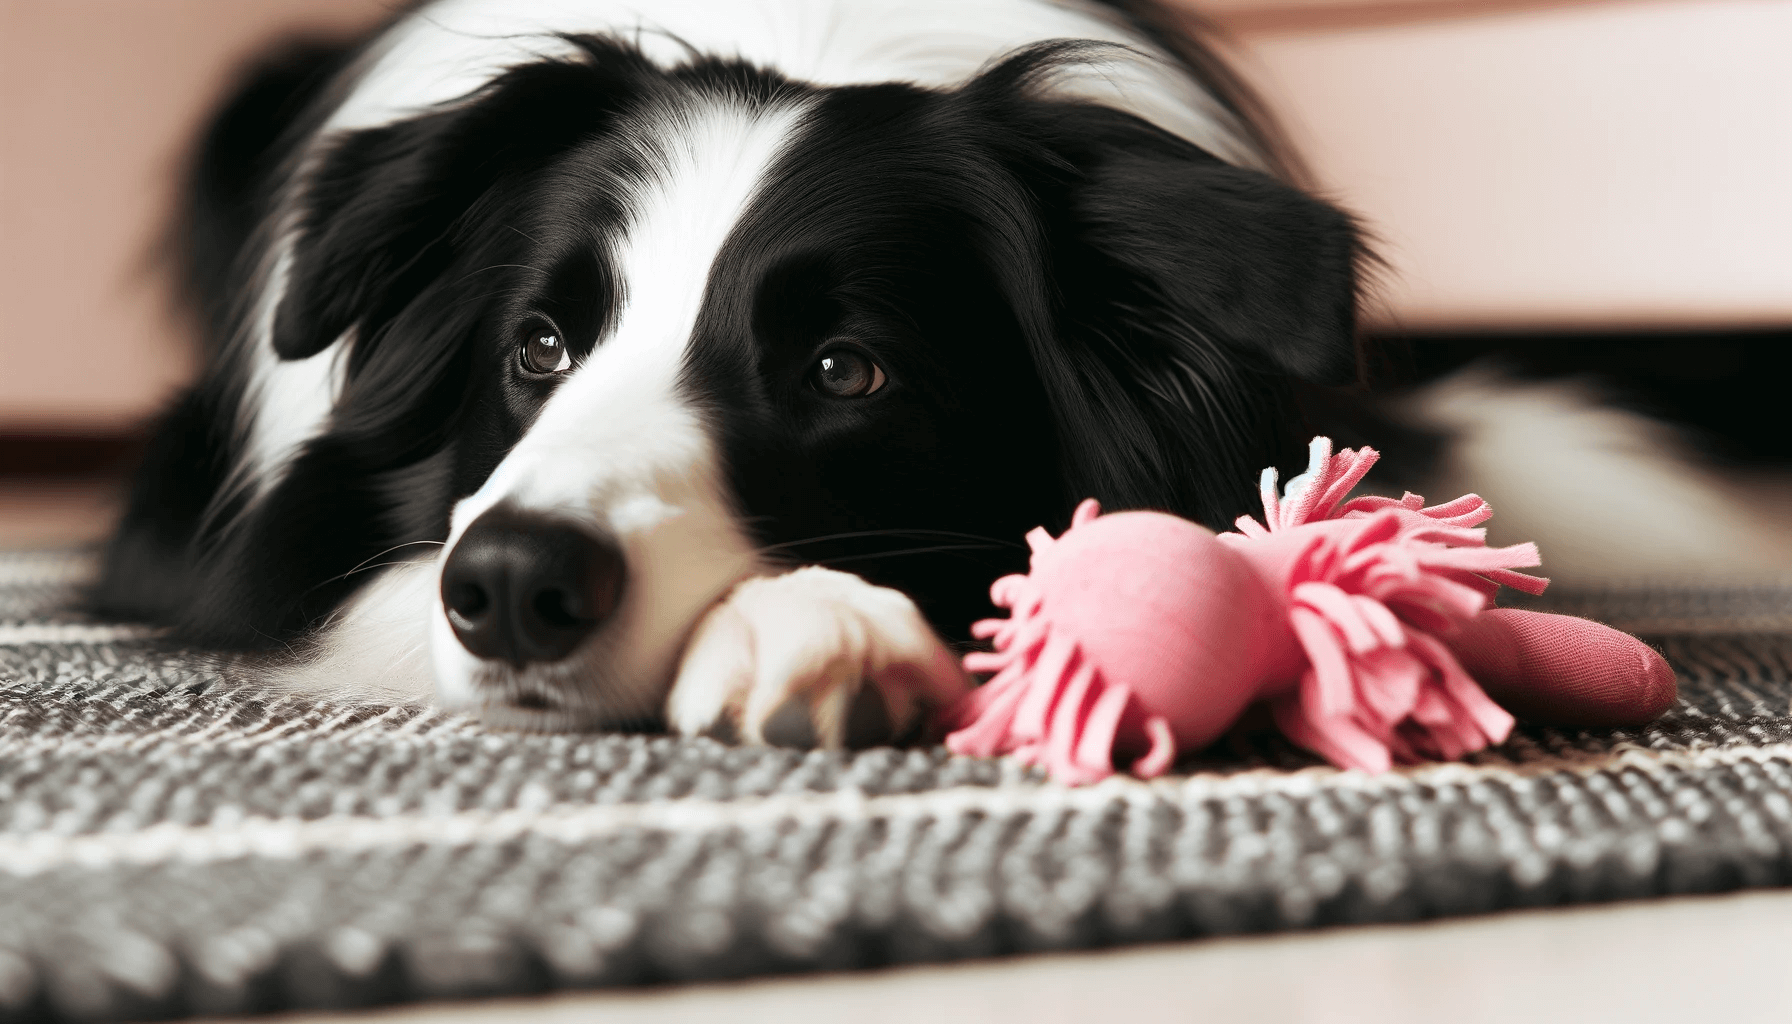 Smooth Coat Border Collie lying down with its head resting on a pink cloth toy, highlighting the breed's gentle and affectionate nature.